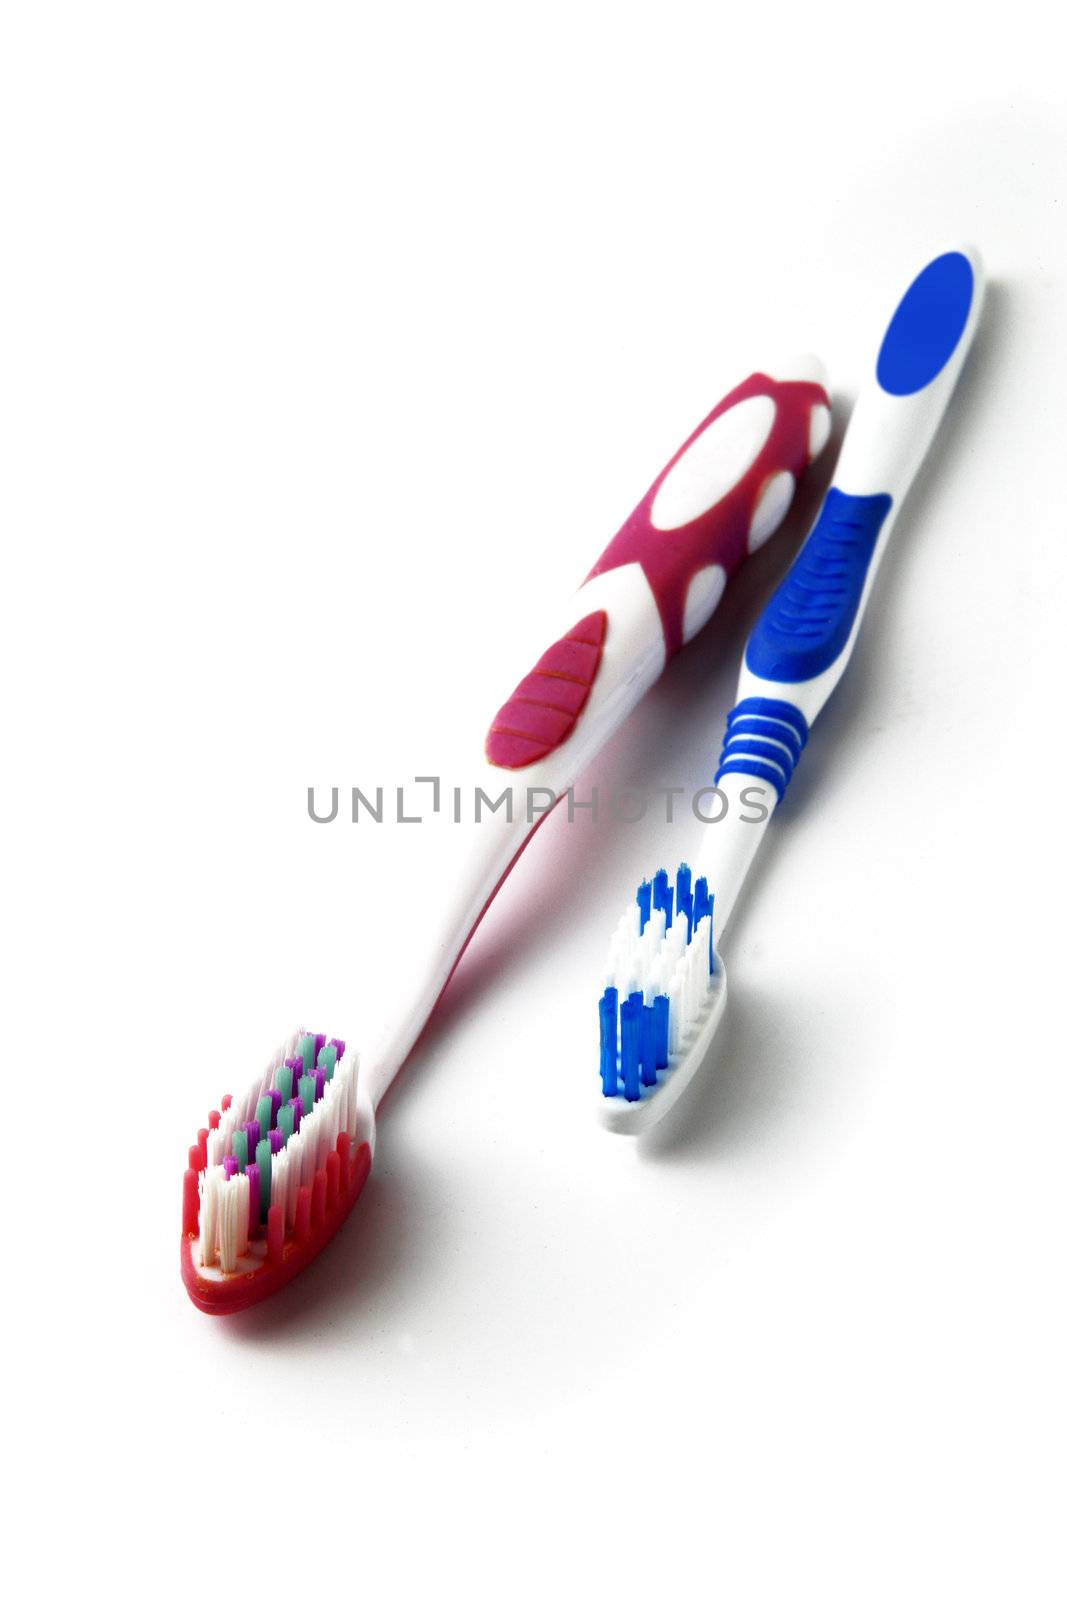 His and hers toothbrushes by phovoir